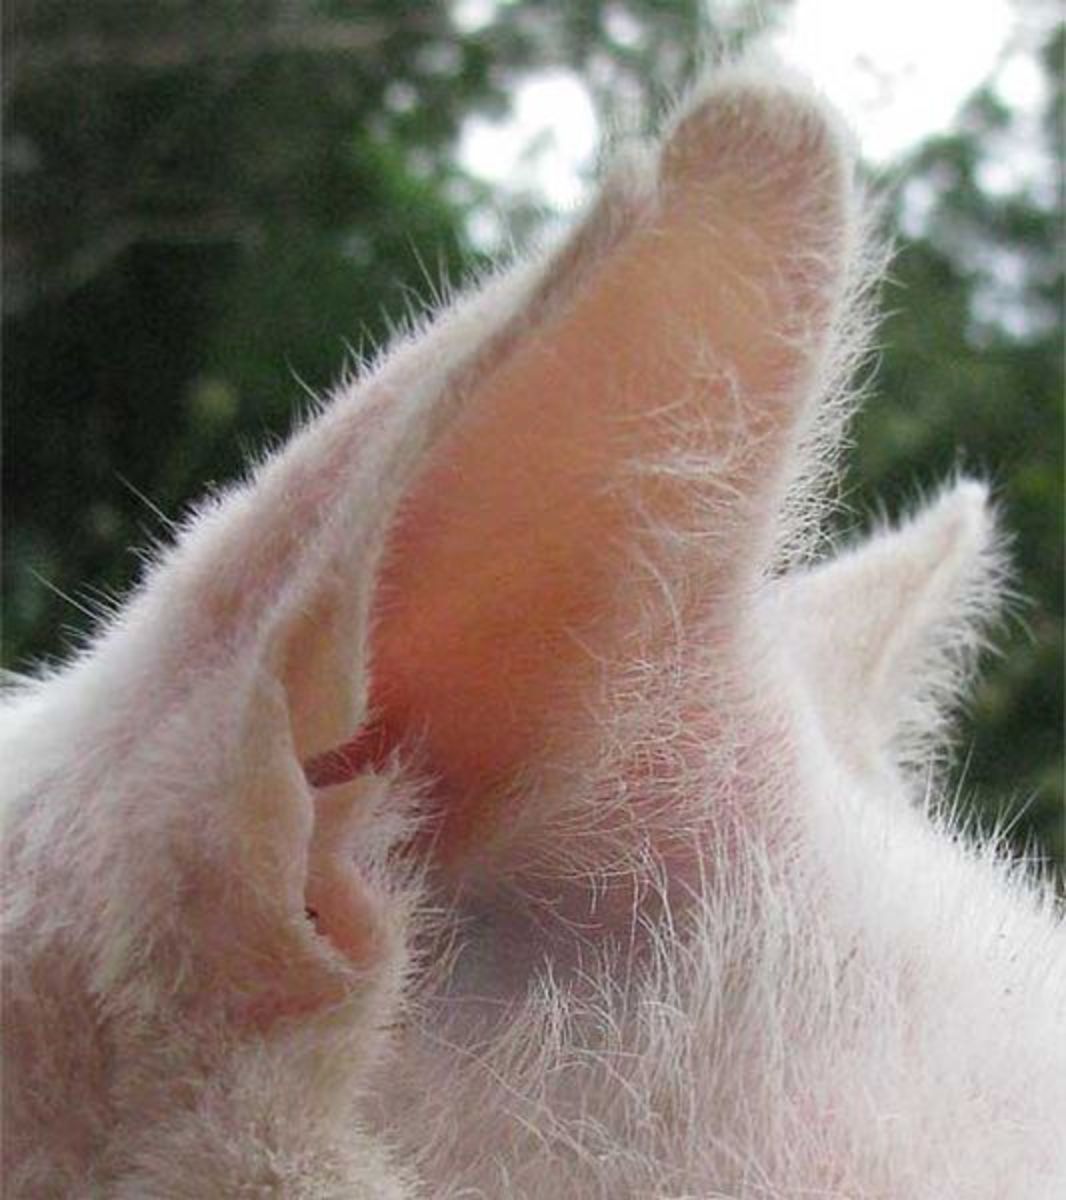 Cats ears are wonderful parts of their features.  But sometimes they can get infected.